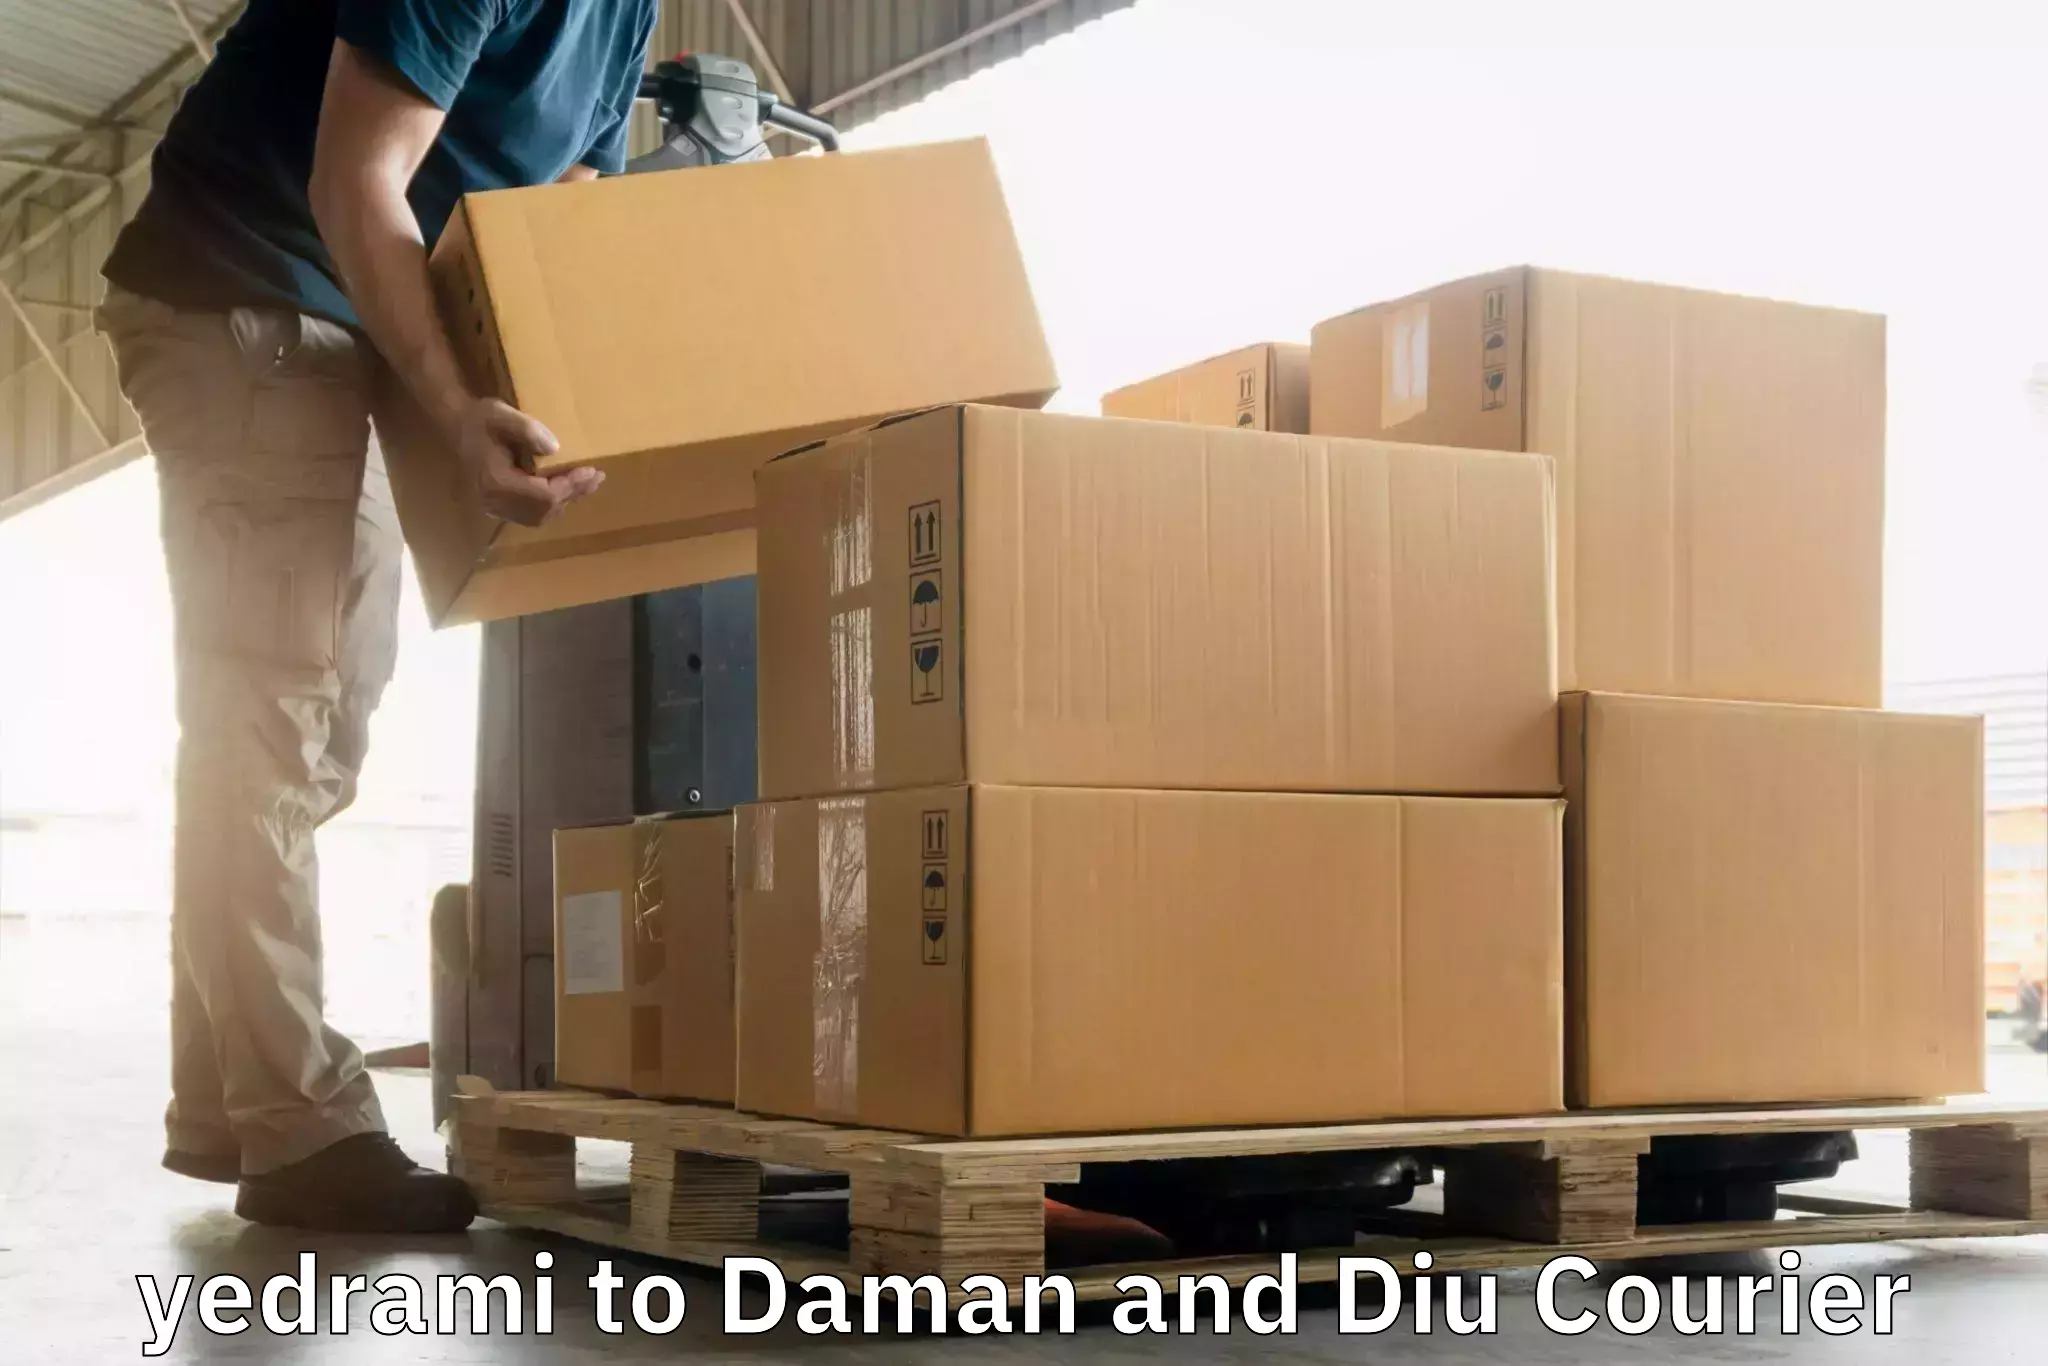 High-speed delivery yedrami to Daman and Diu